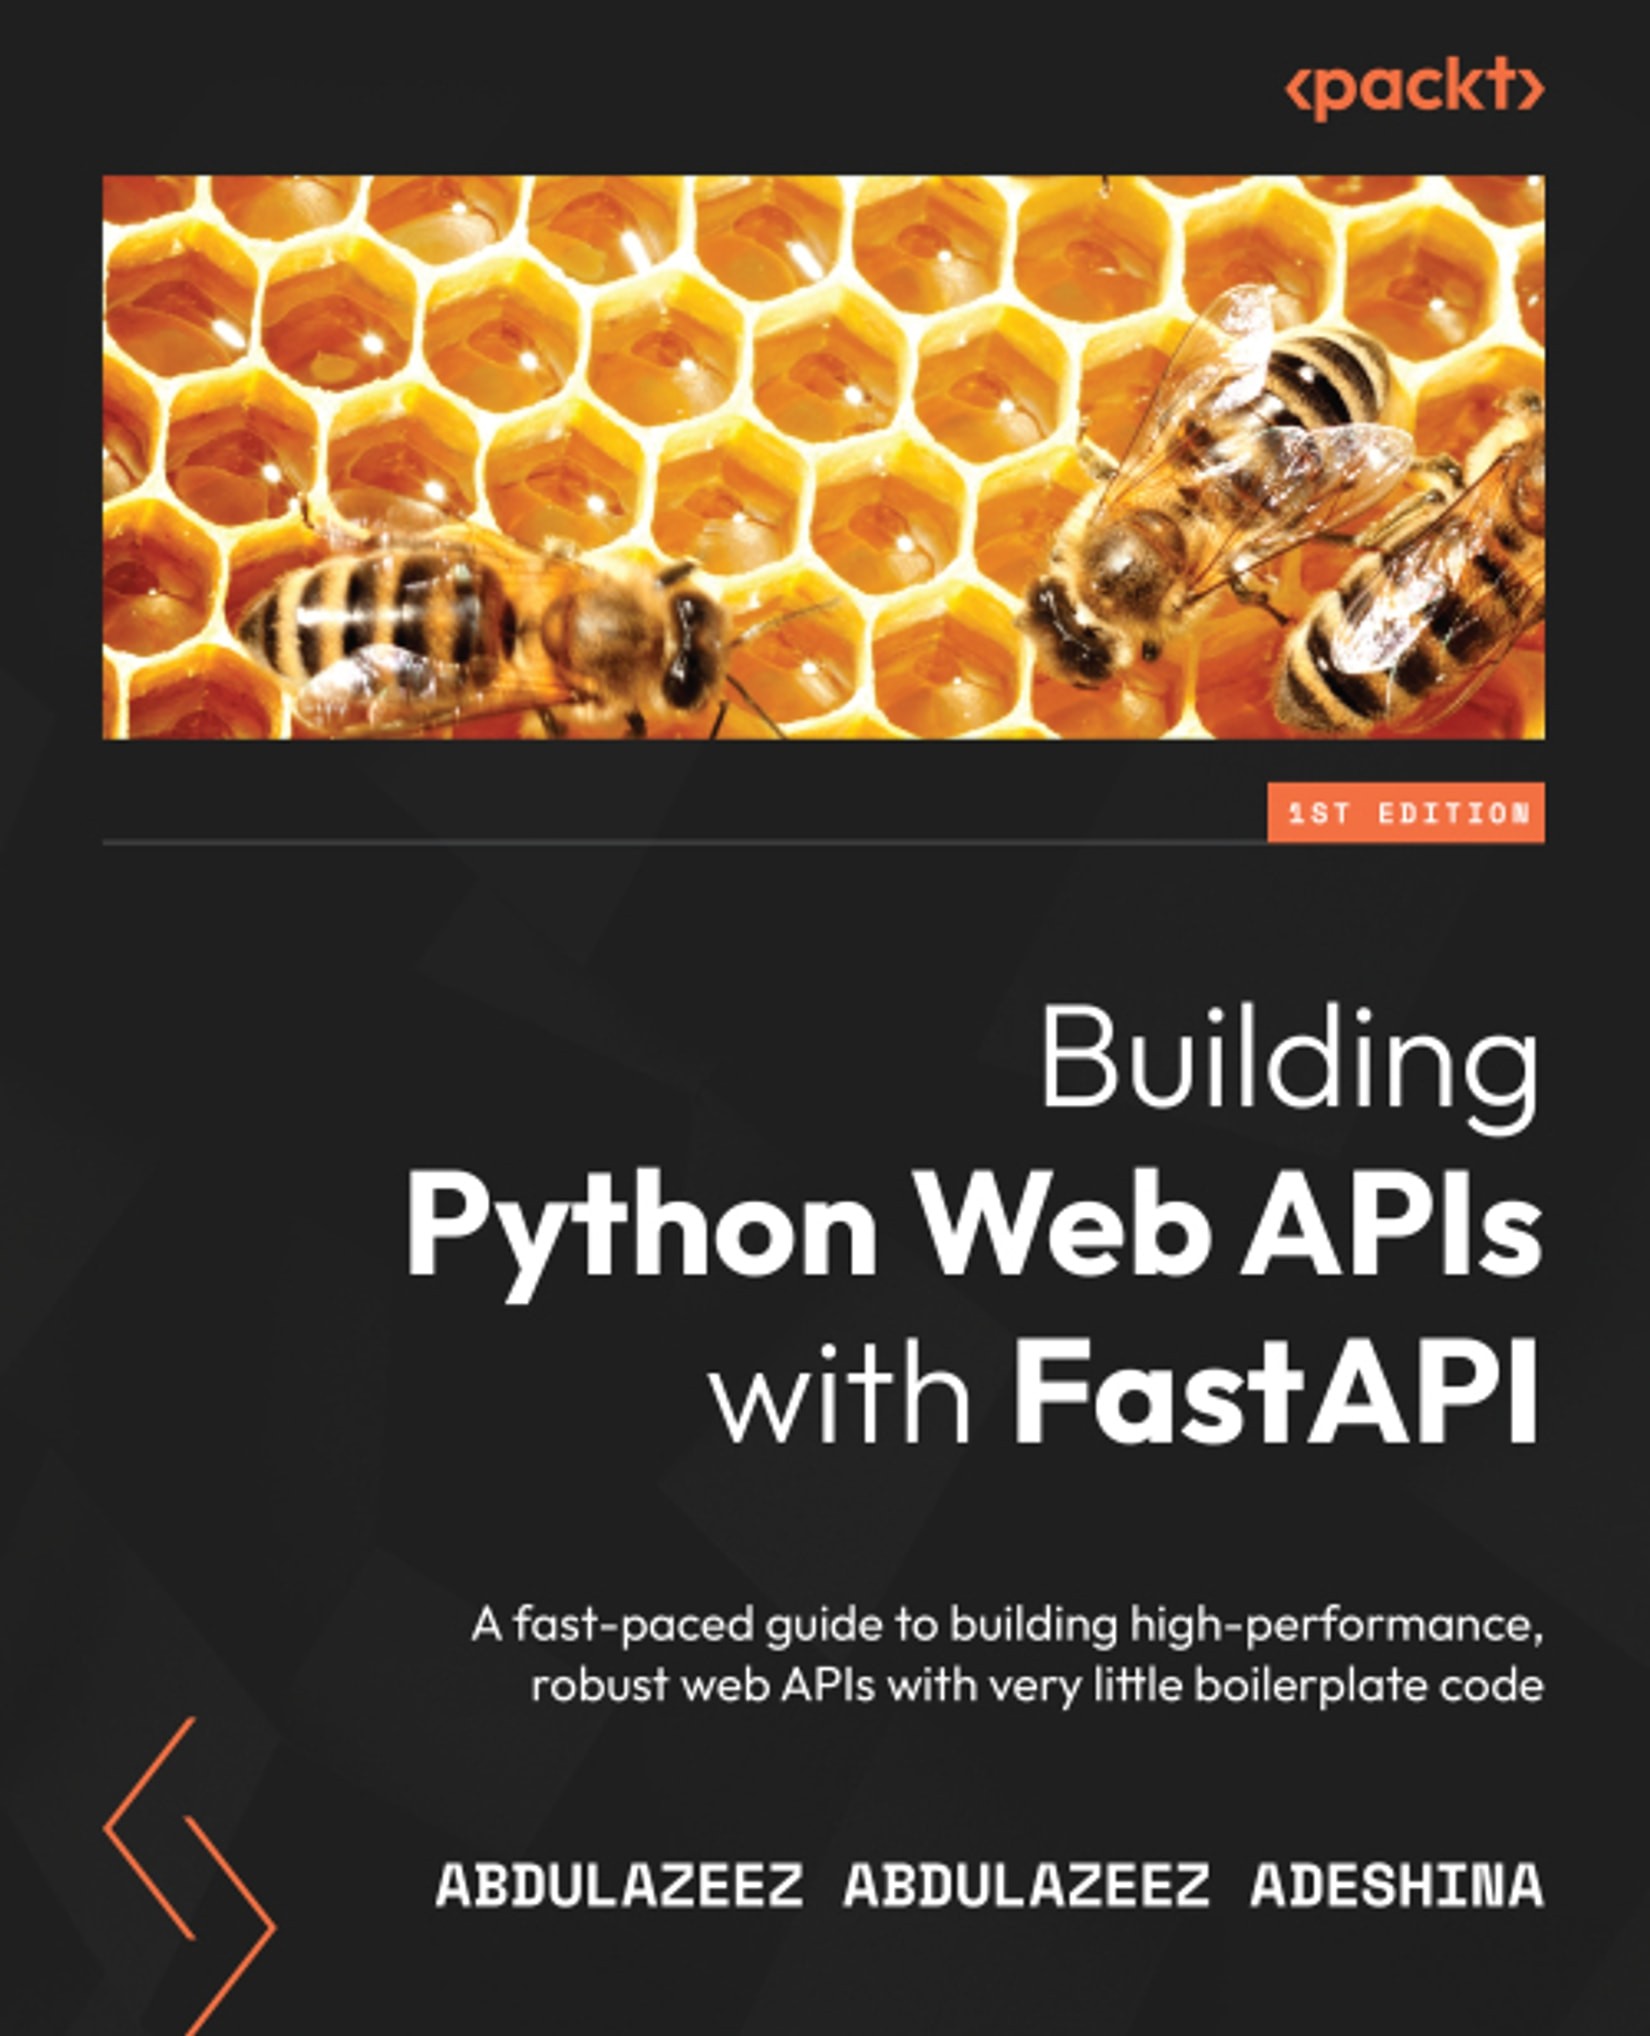 Building Python Web APIs With FastAPI: A Fast-Paced Guide to Building High-Performance, Robust Web APIs With Very Little Boilerplate Code